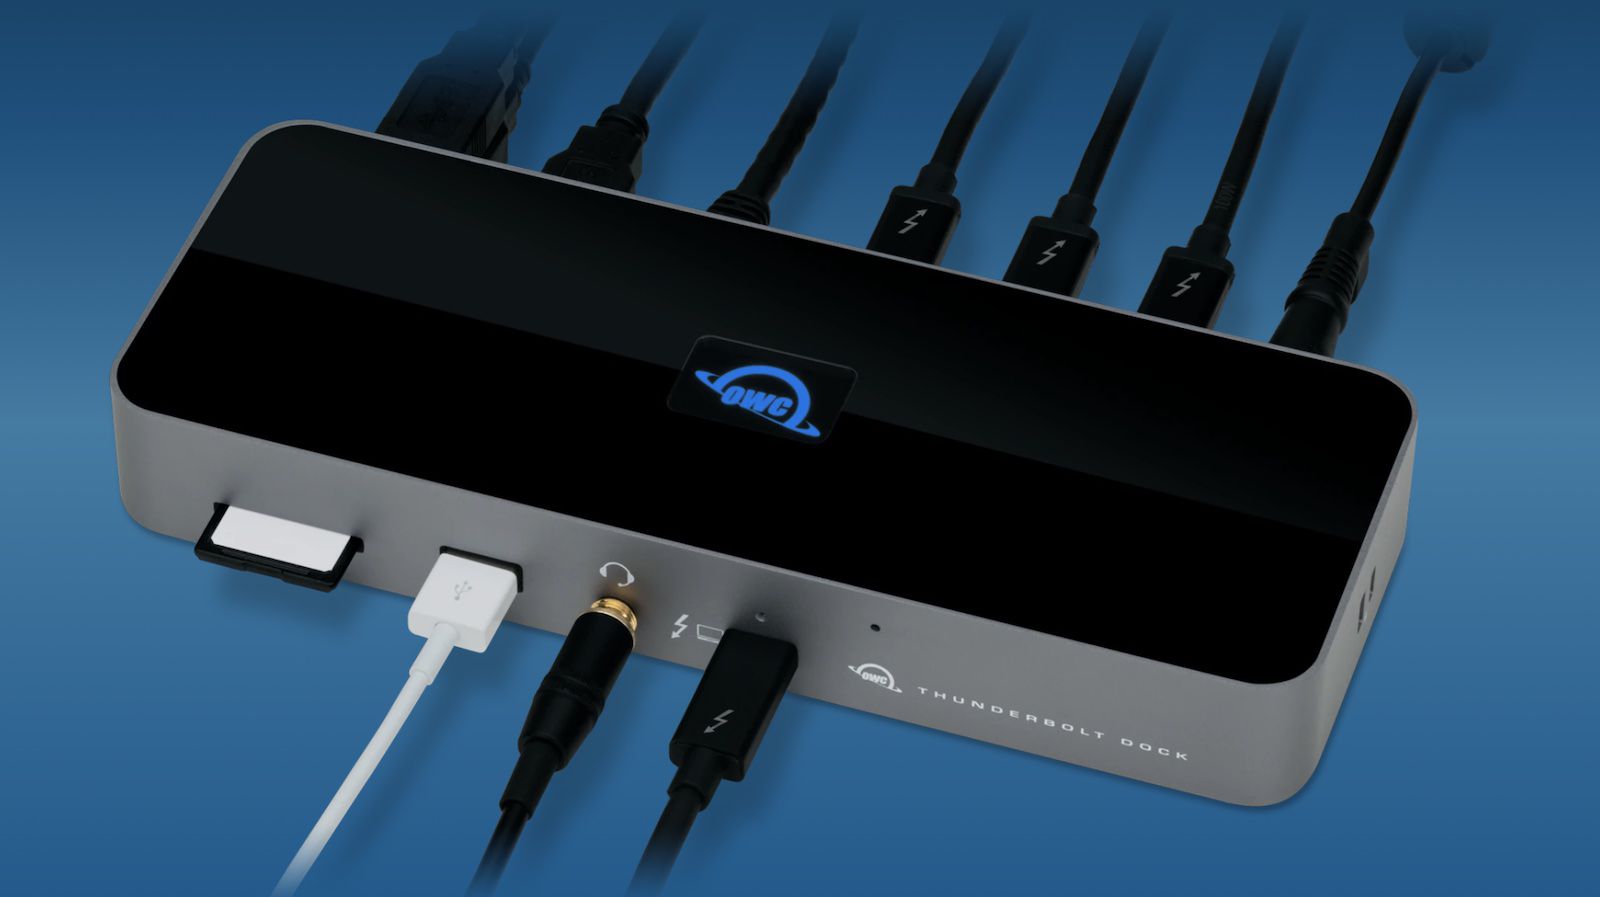 CES 2021: OWC Introduces Thunderbolt 4 Dock, New Storage Drives